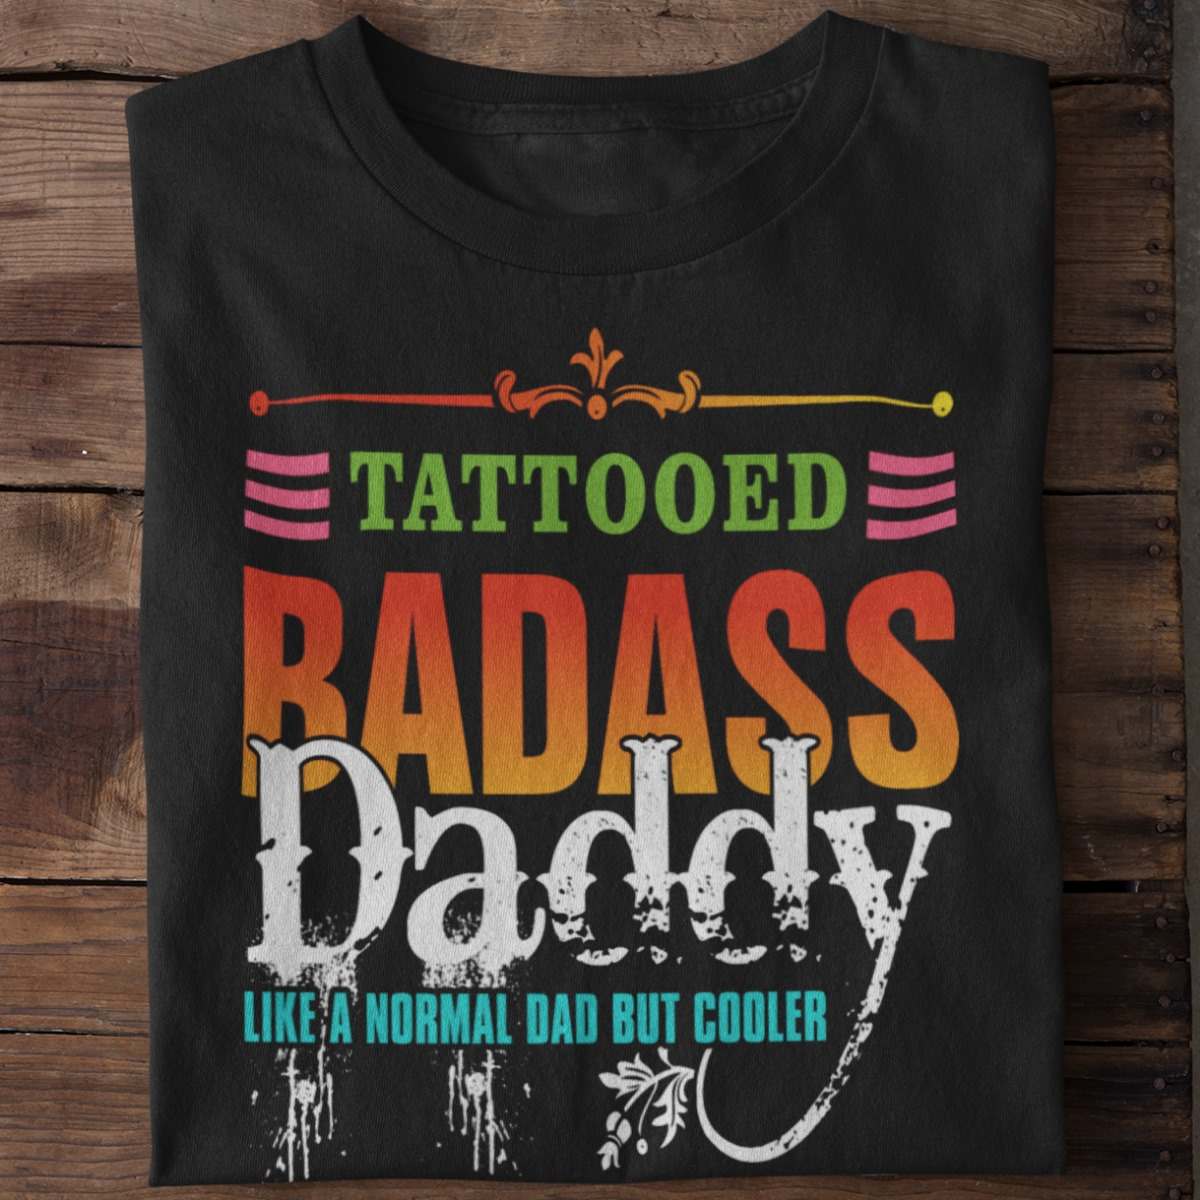 Tattooed badass daddy like a normal dad but cooler - Father love tattoo